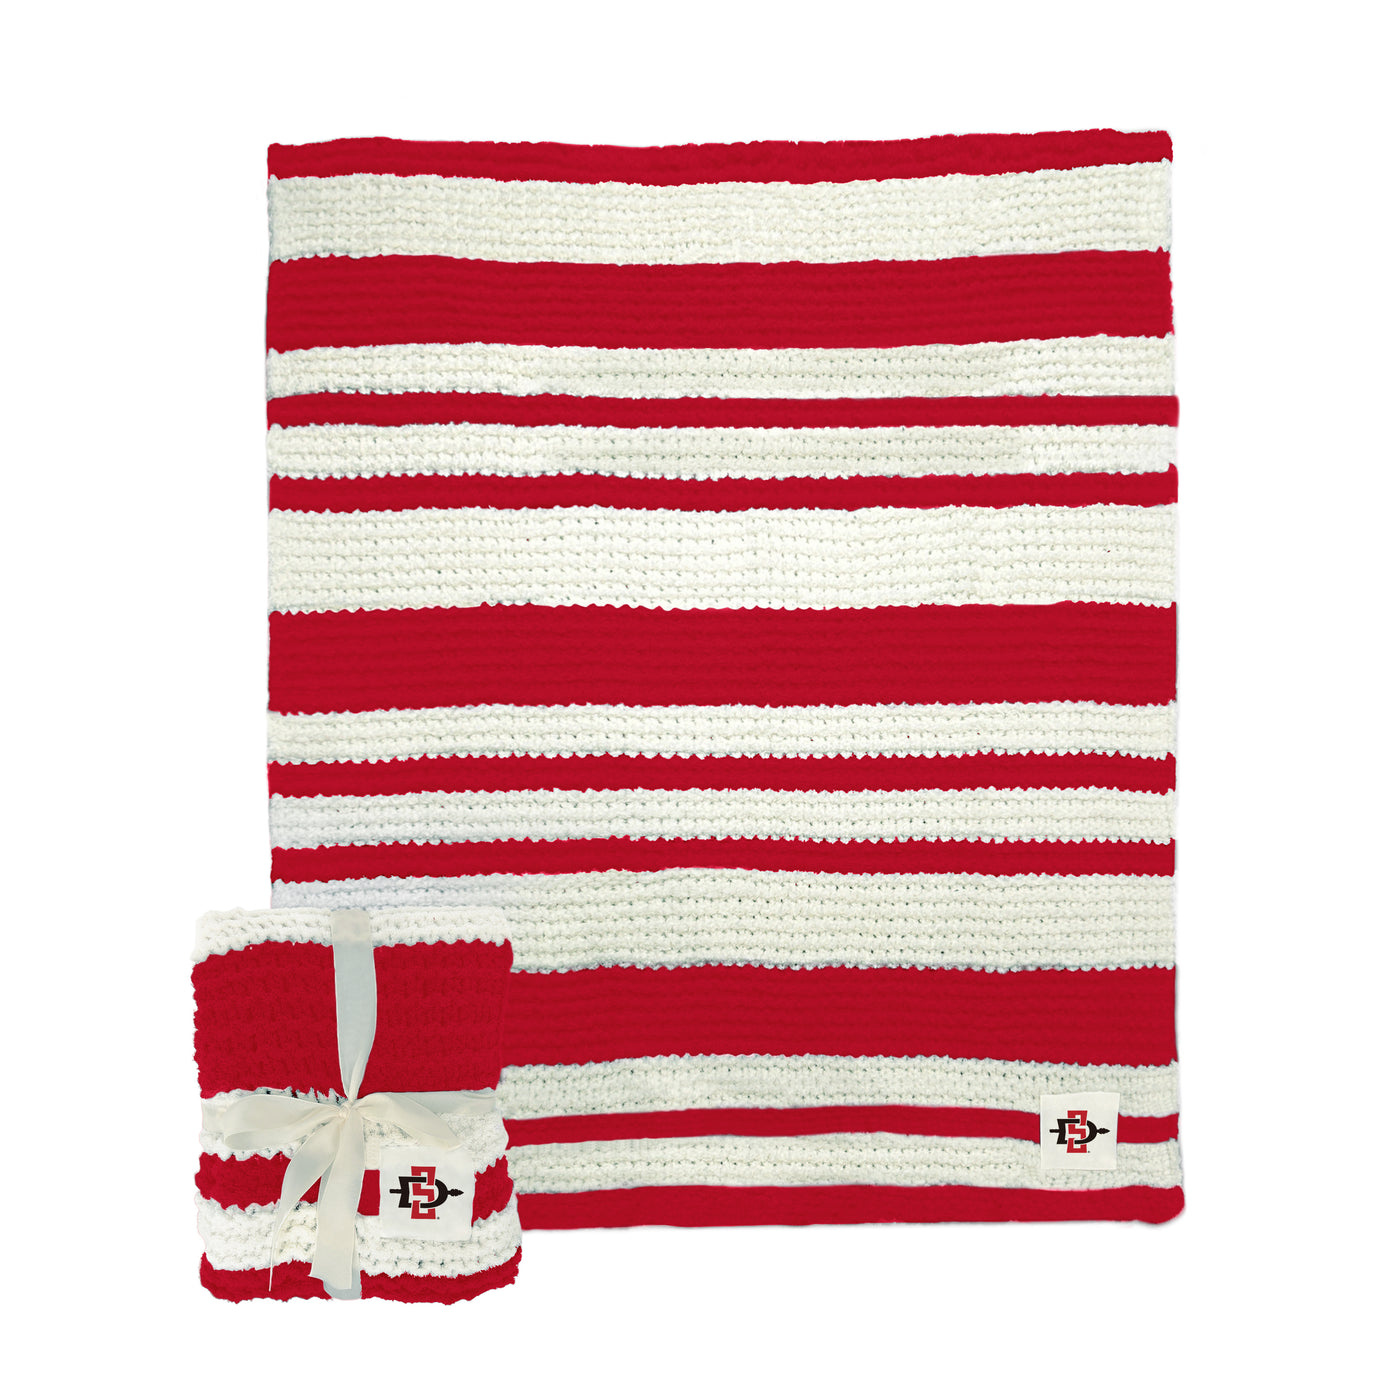 San Diego State Cable Knit Throw 50x60